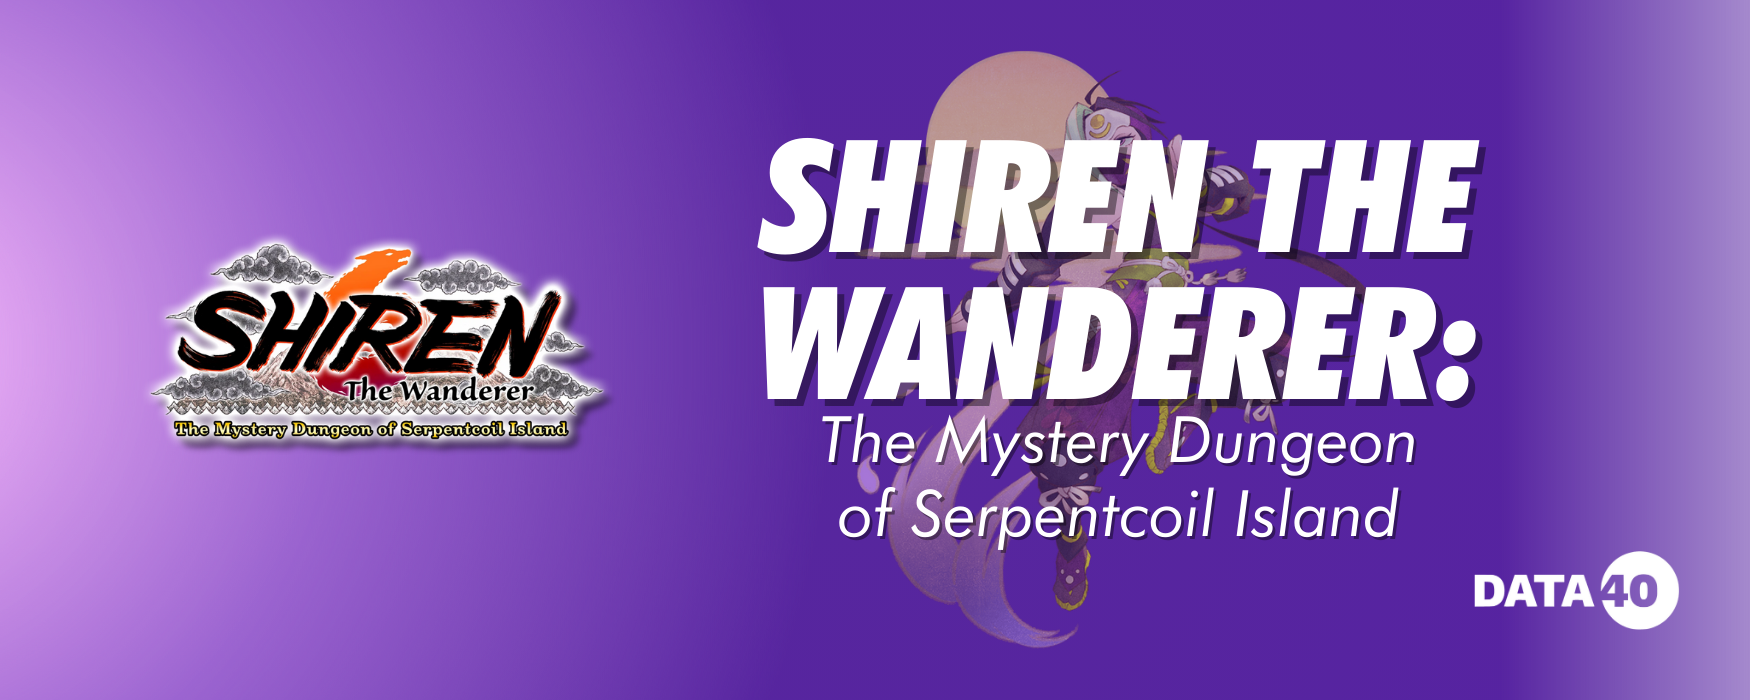 Shiren the Wanderer_ The Mystery Dungeon of Serpentcoil Island